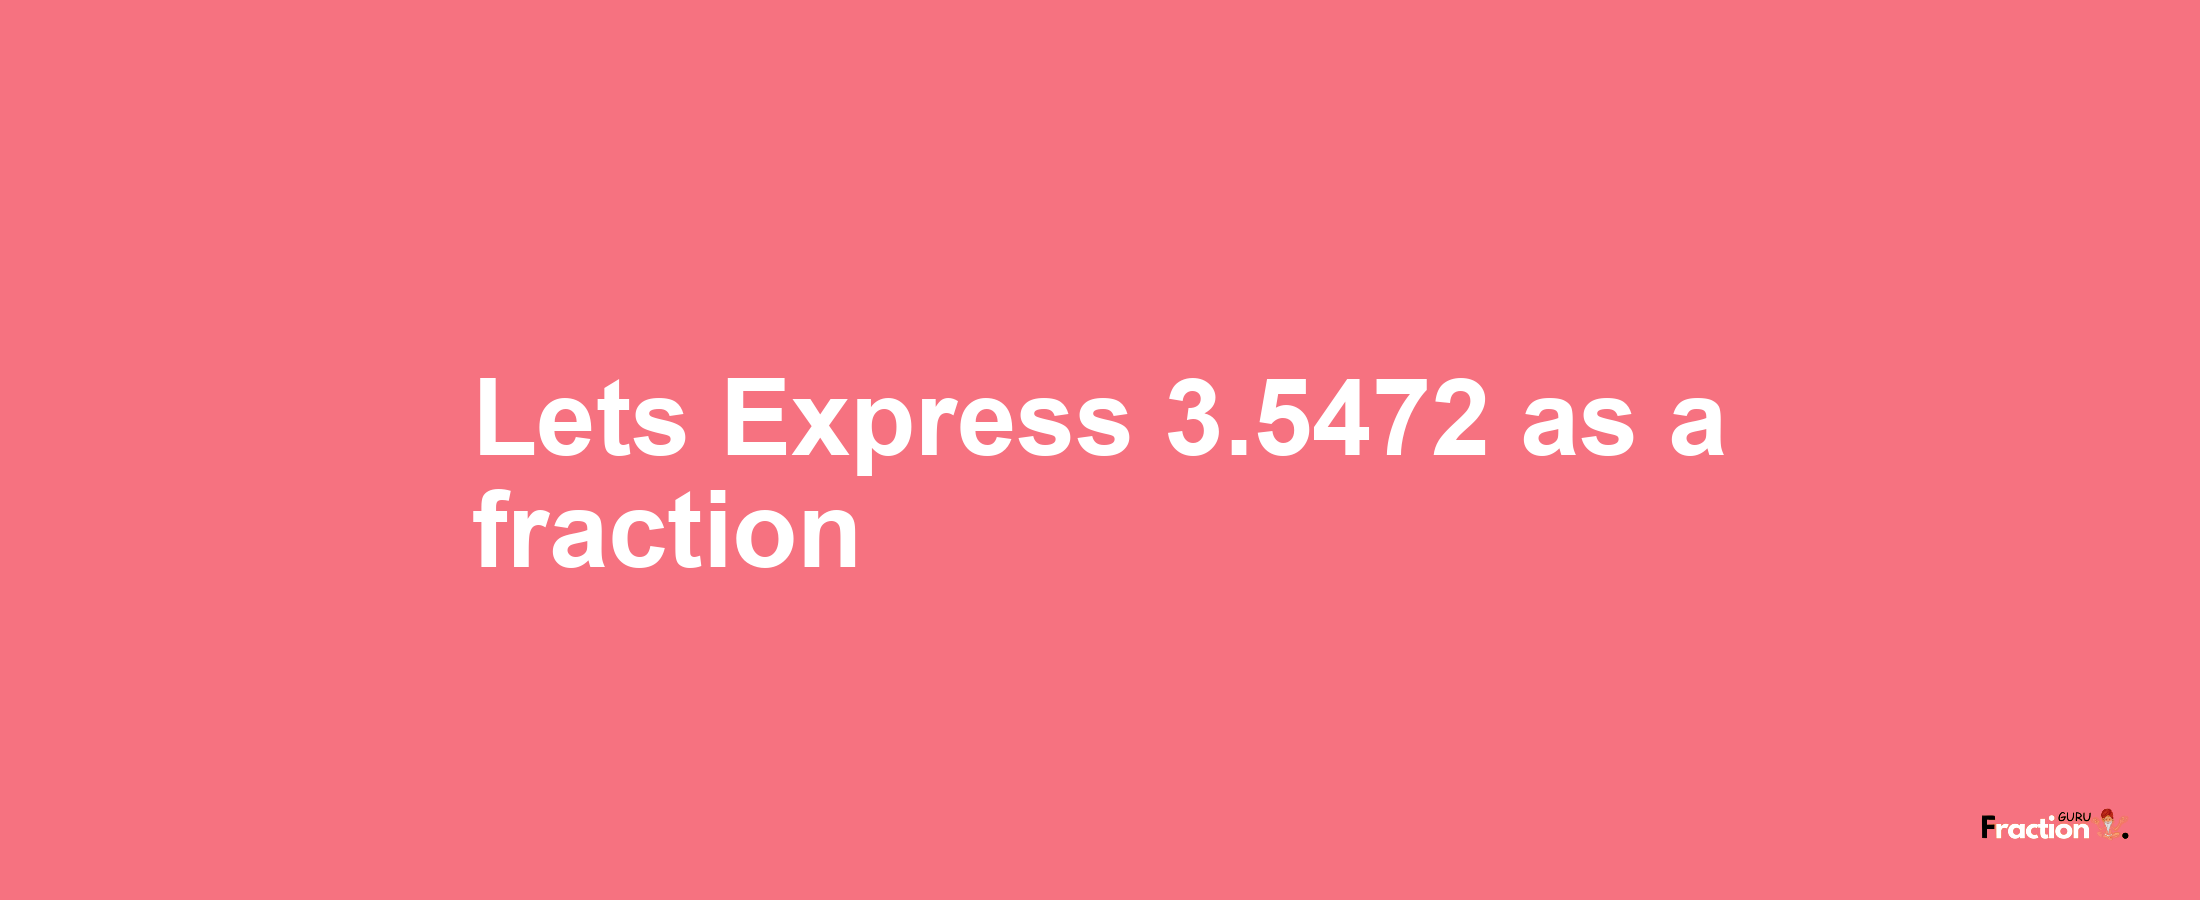 Lets Express 3.5472 as afraction